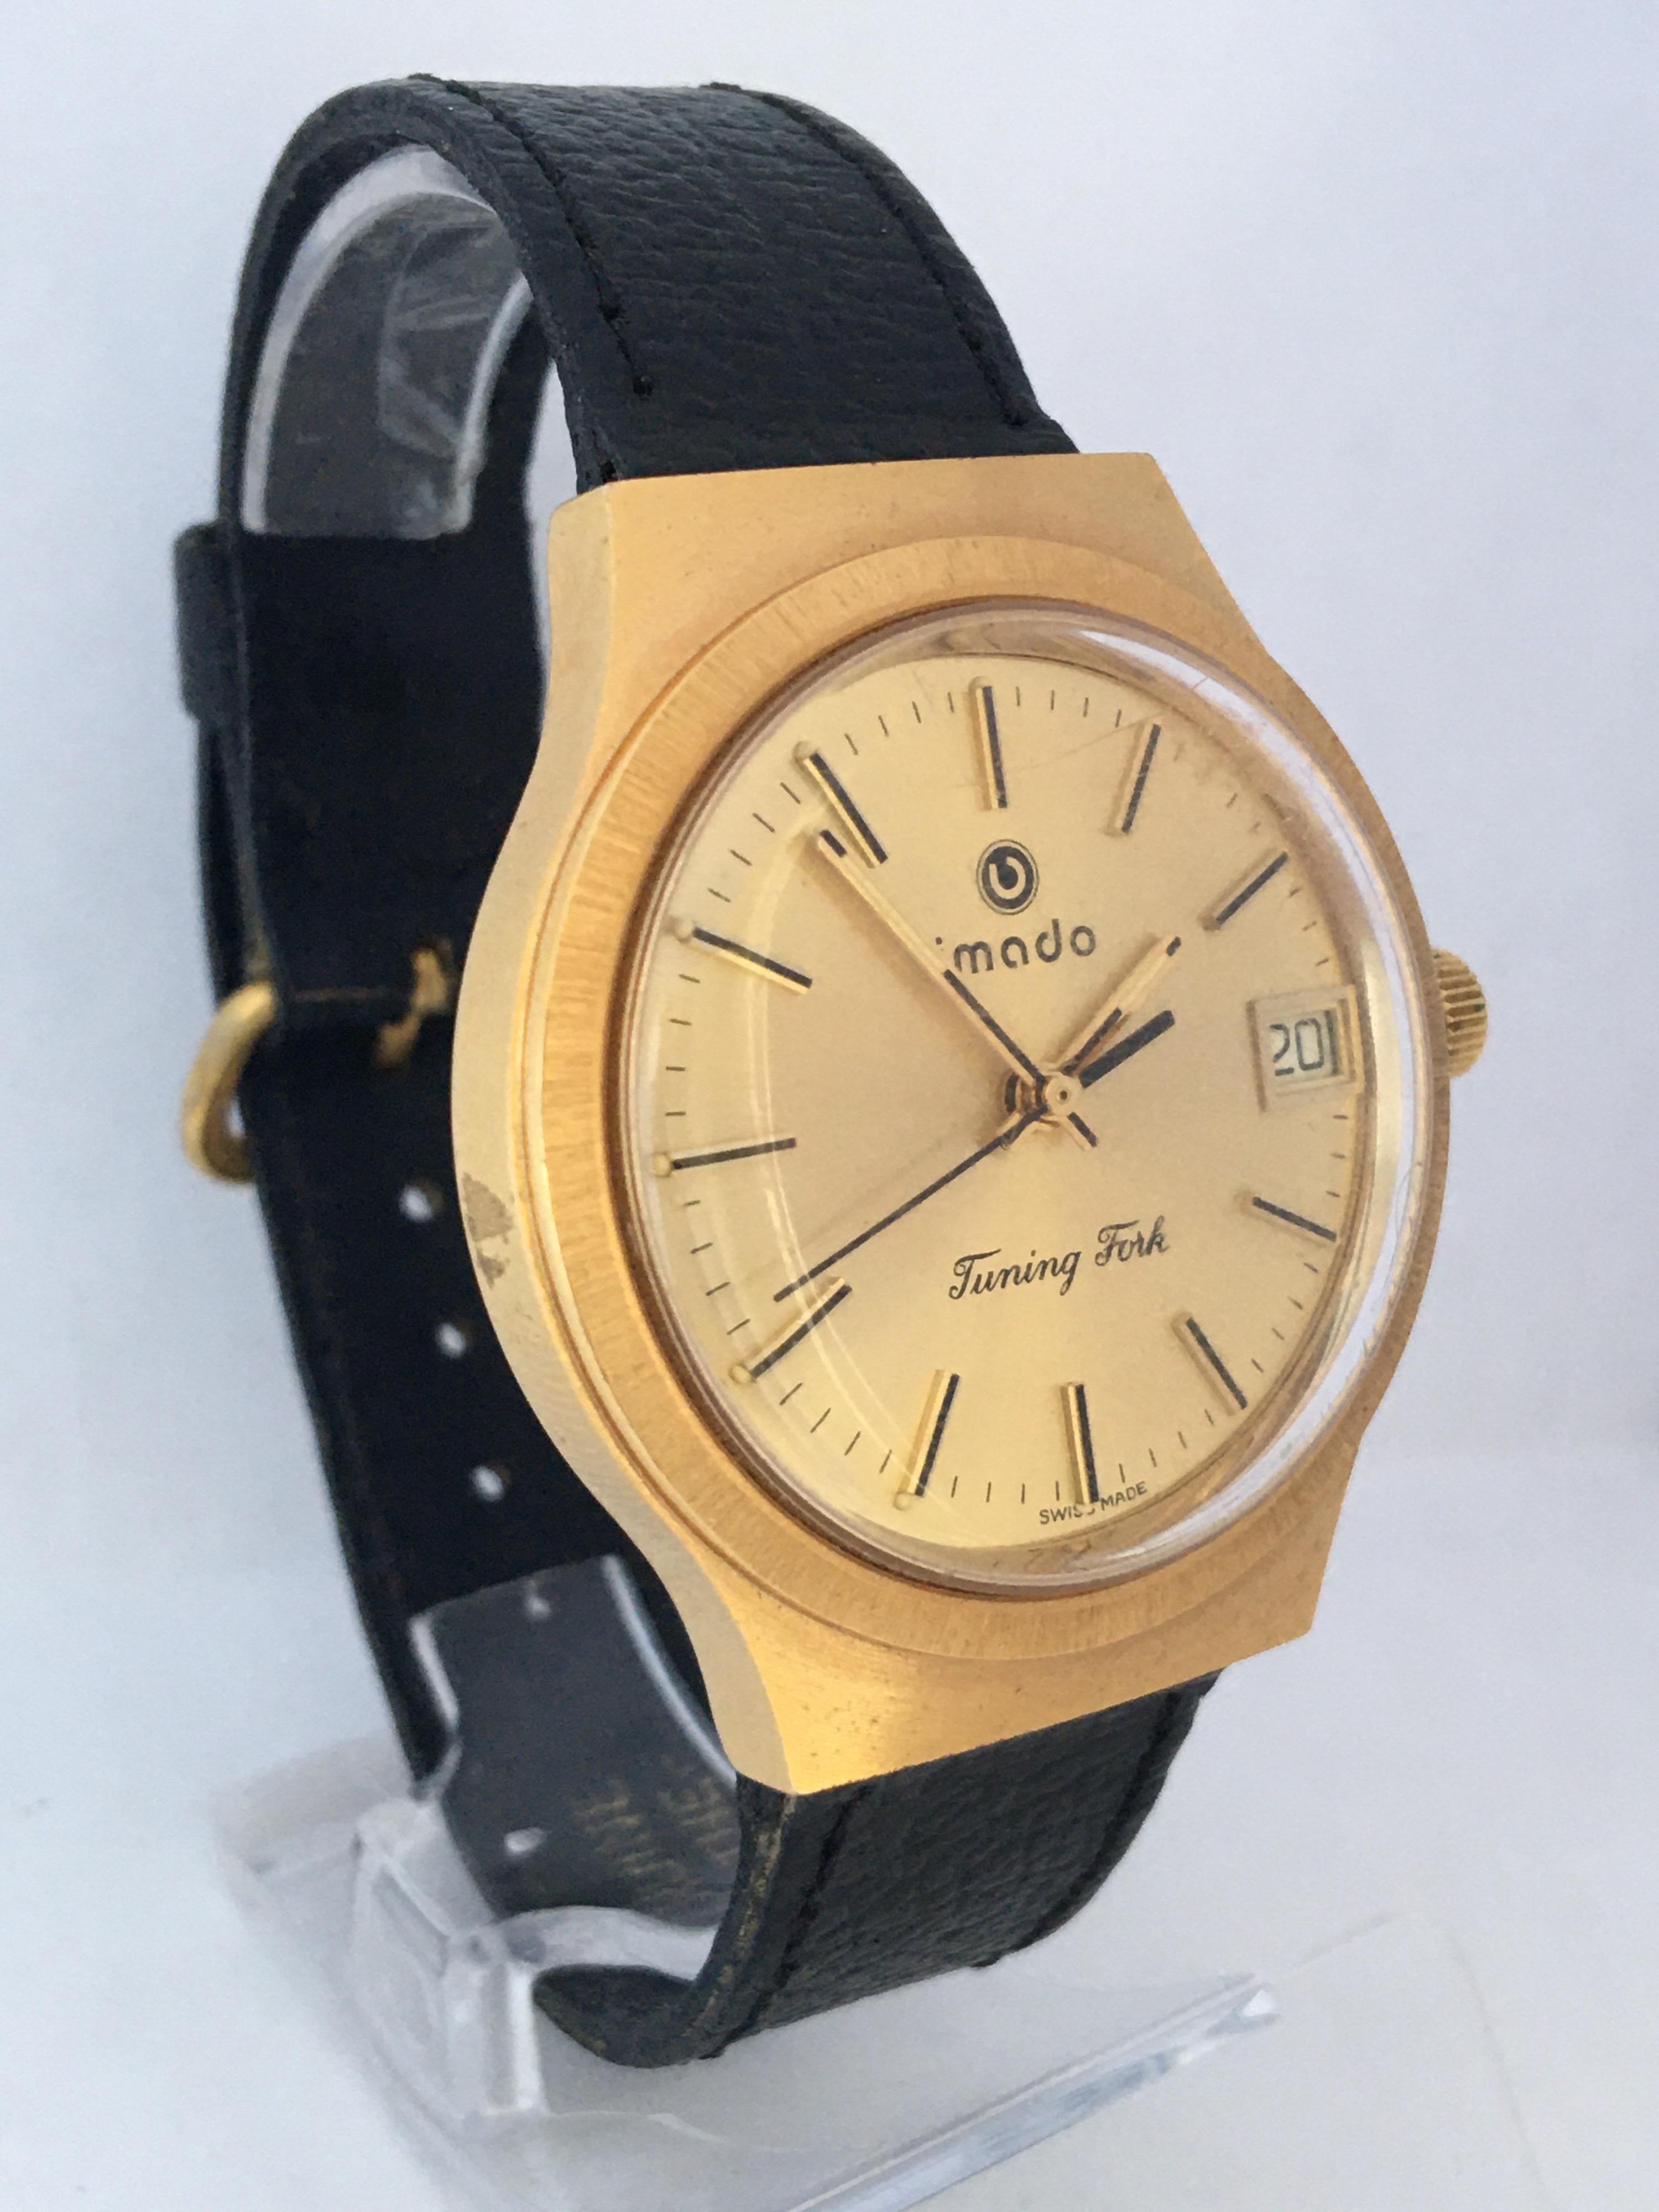 This pre-owned vintage battery operated watch is in good working condition and it is running well. Visible signs of ageing and wear with light scratches on the glass and on the watch case as shown.

Please study the images carefully as form part of